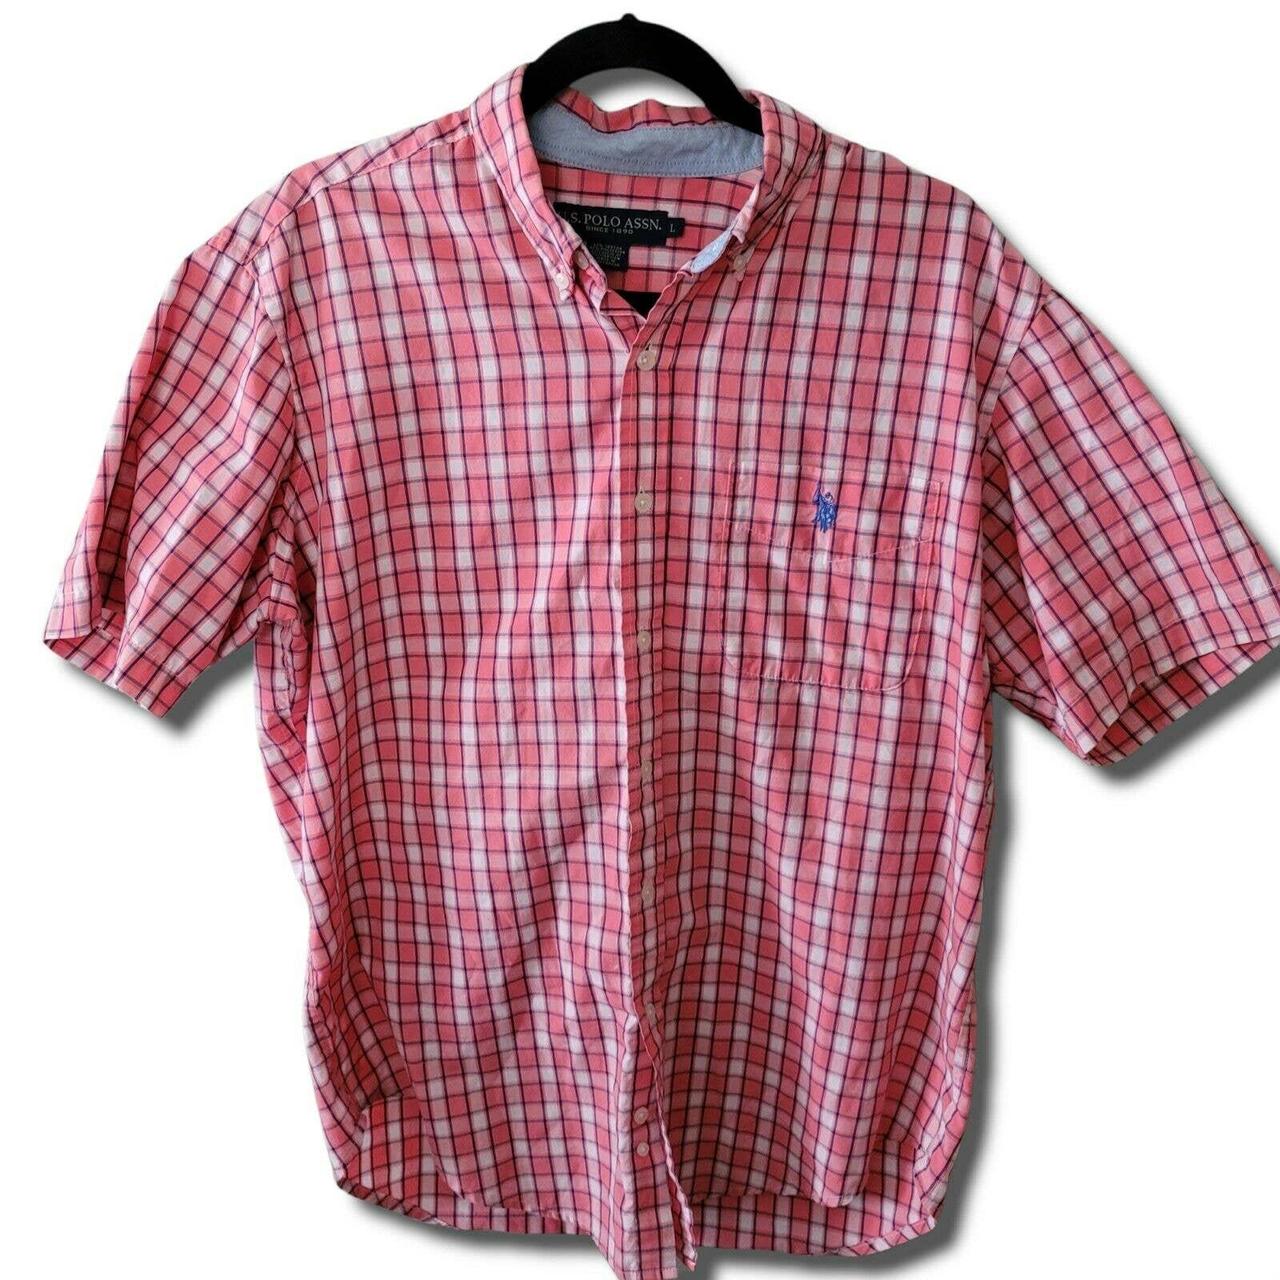 U.S. Polo Assn. Men's Pink and White Shirt